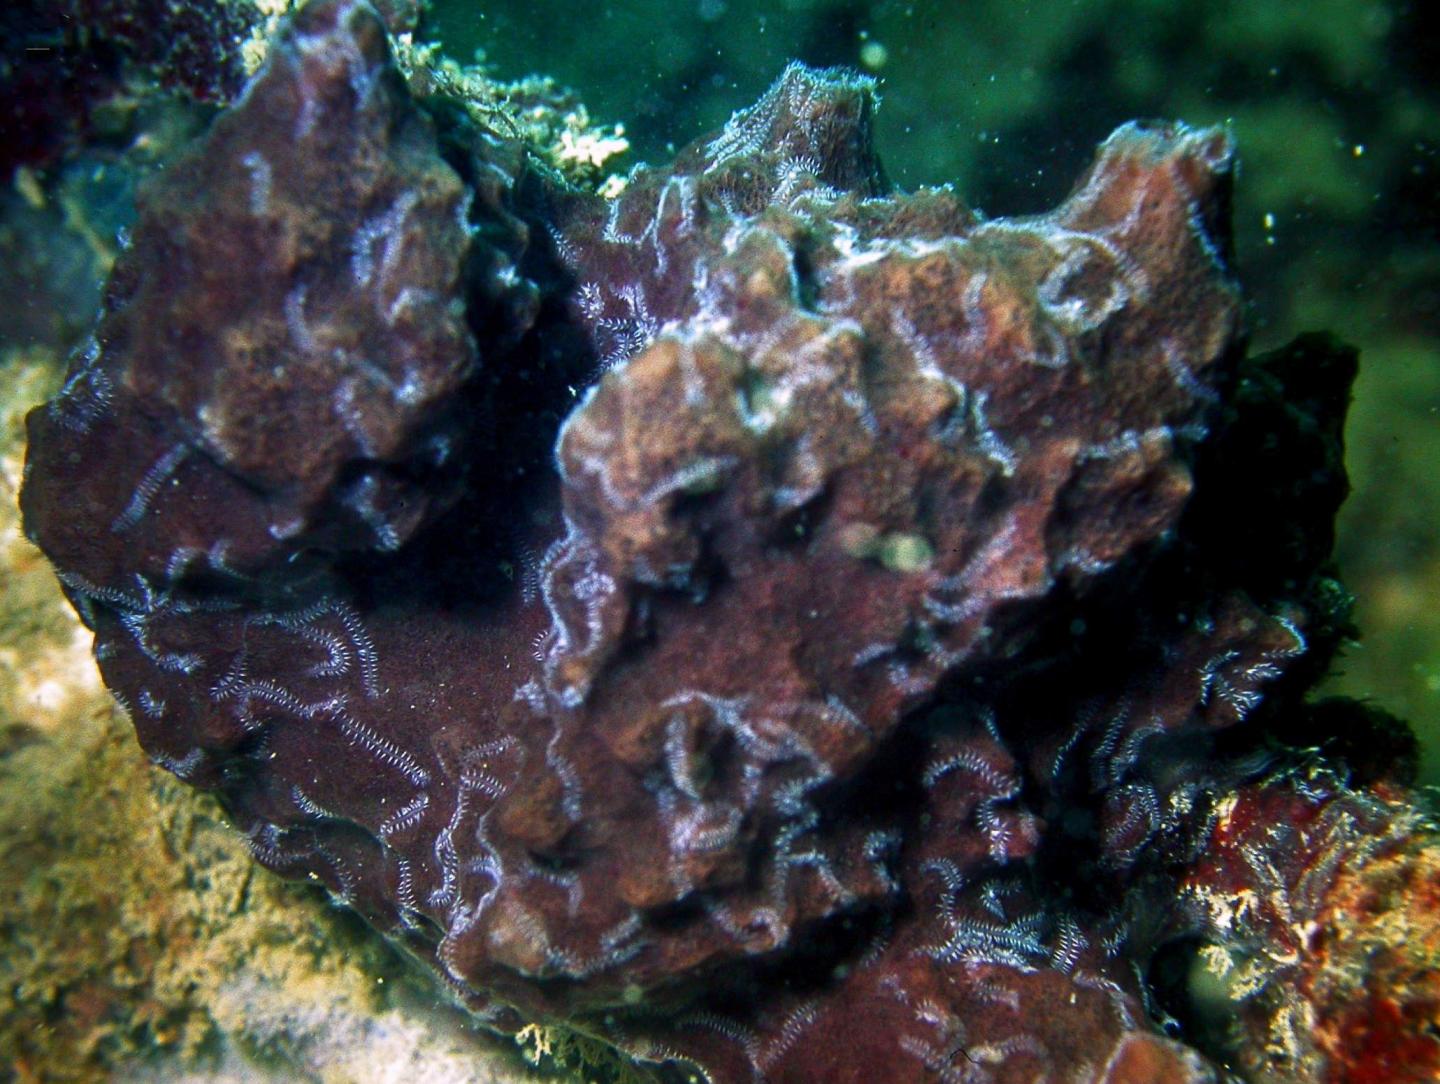 The host sponge in which the branching worm lives